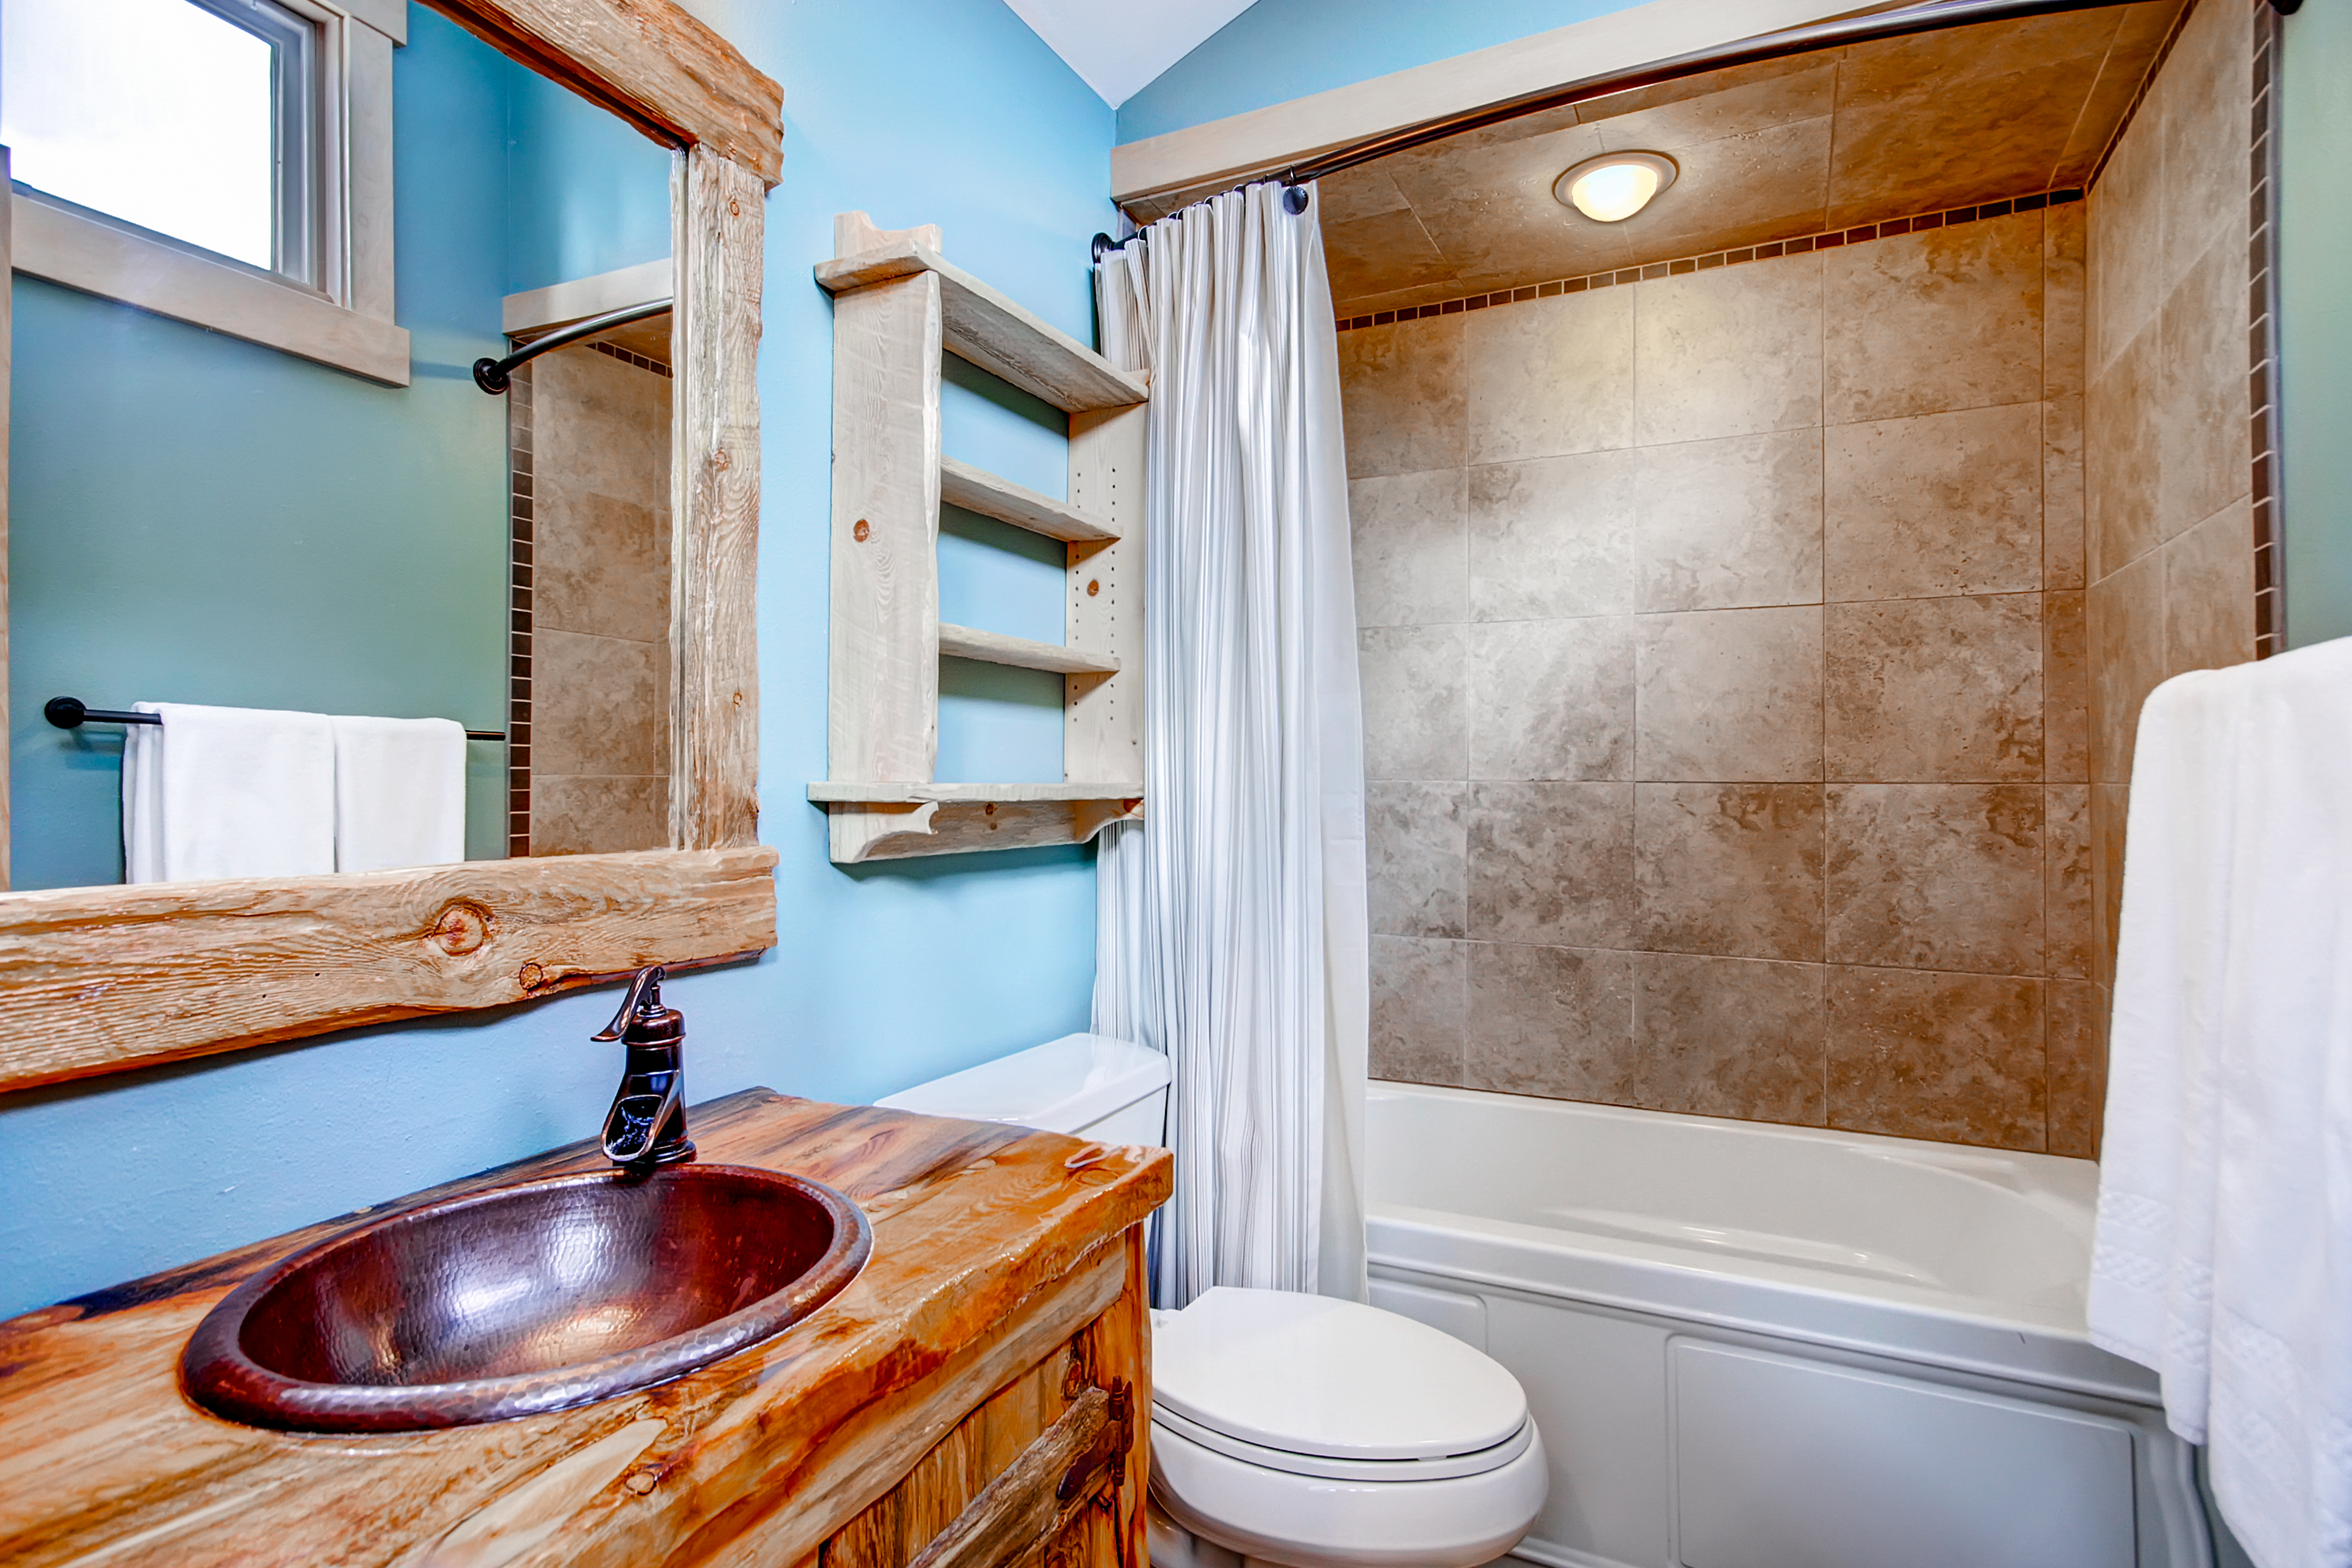 Hallway bathroom utilized by the King bedroom and loft beds - 4 O’Clock Lodge D26 Breckenridge Vacation Rental